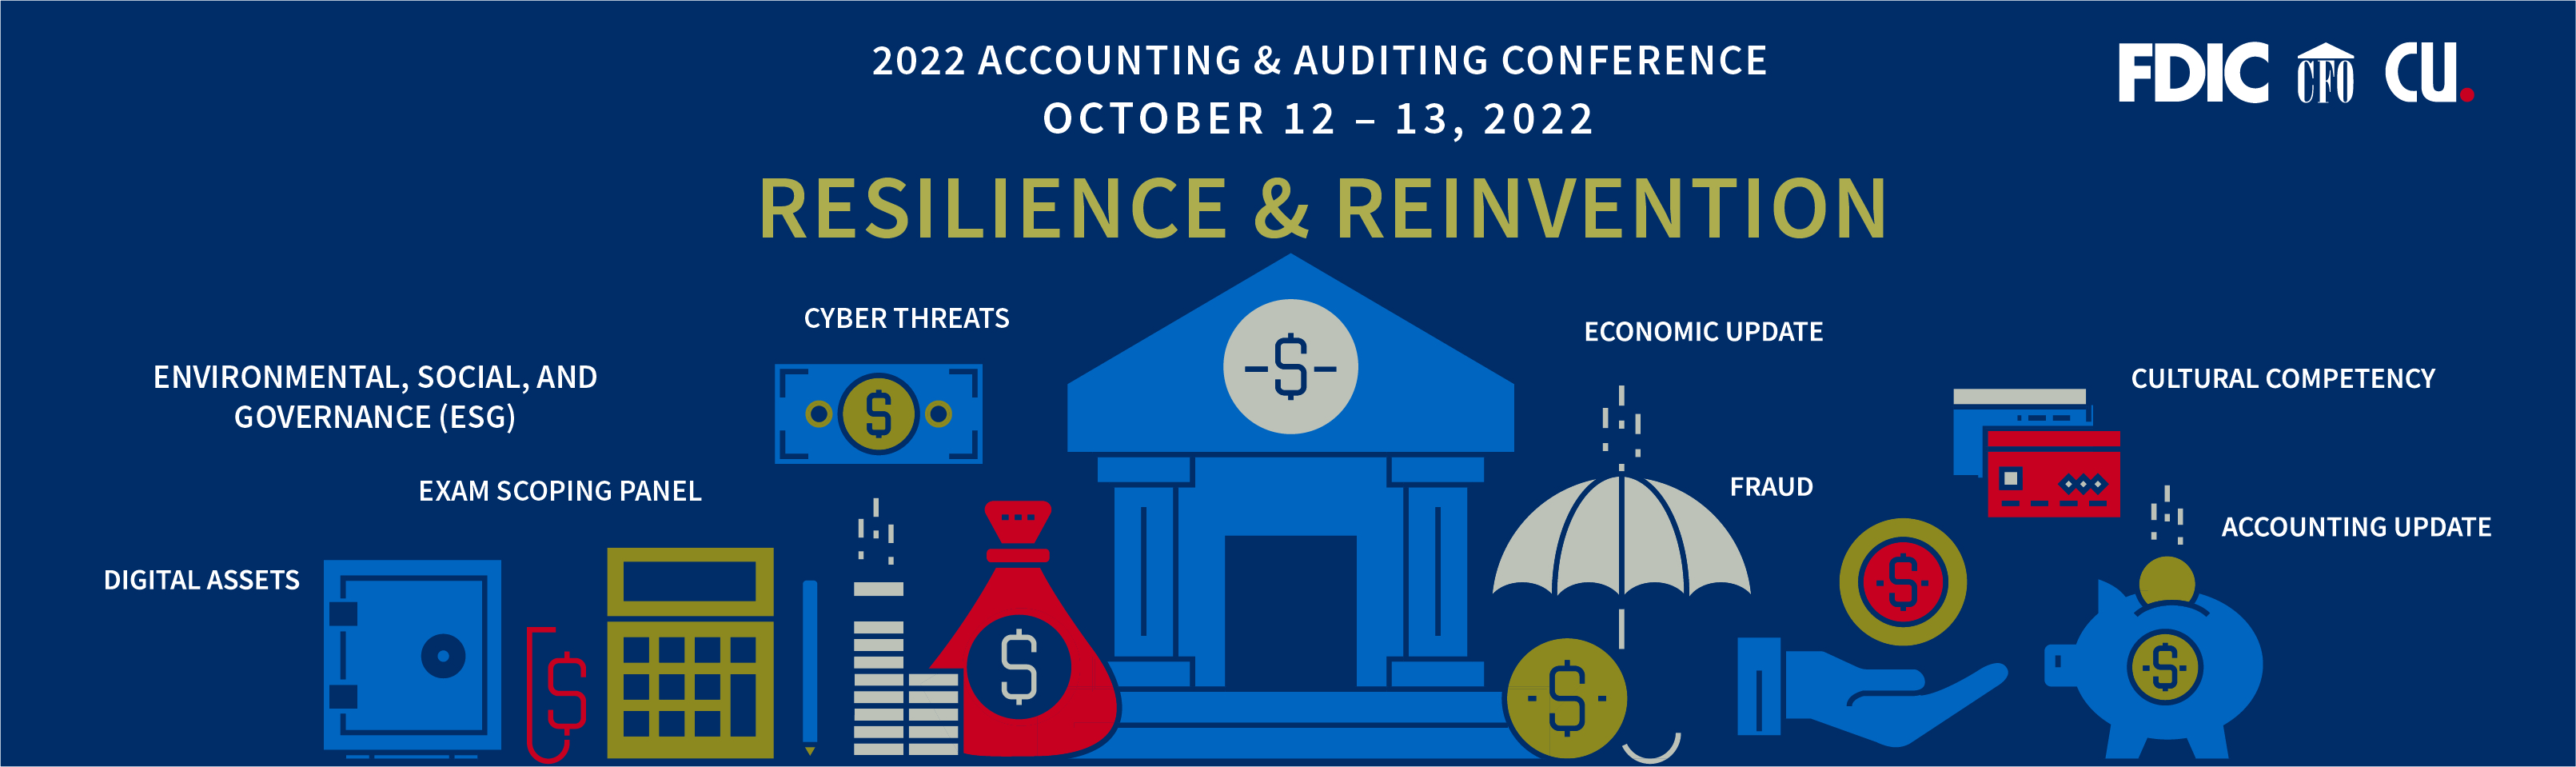 2022 Accounting & Auditing Conference header